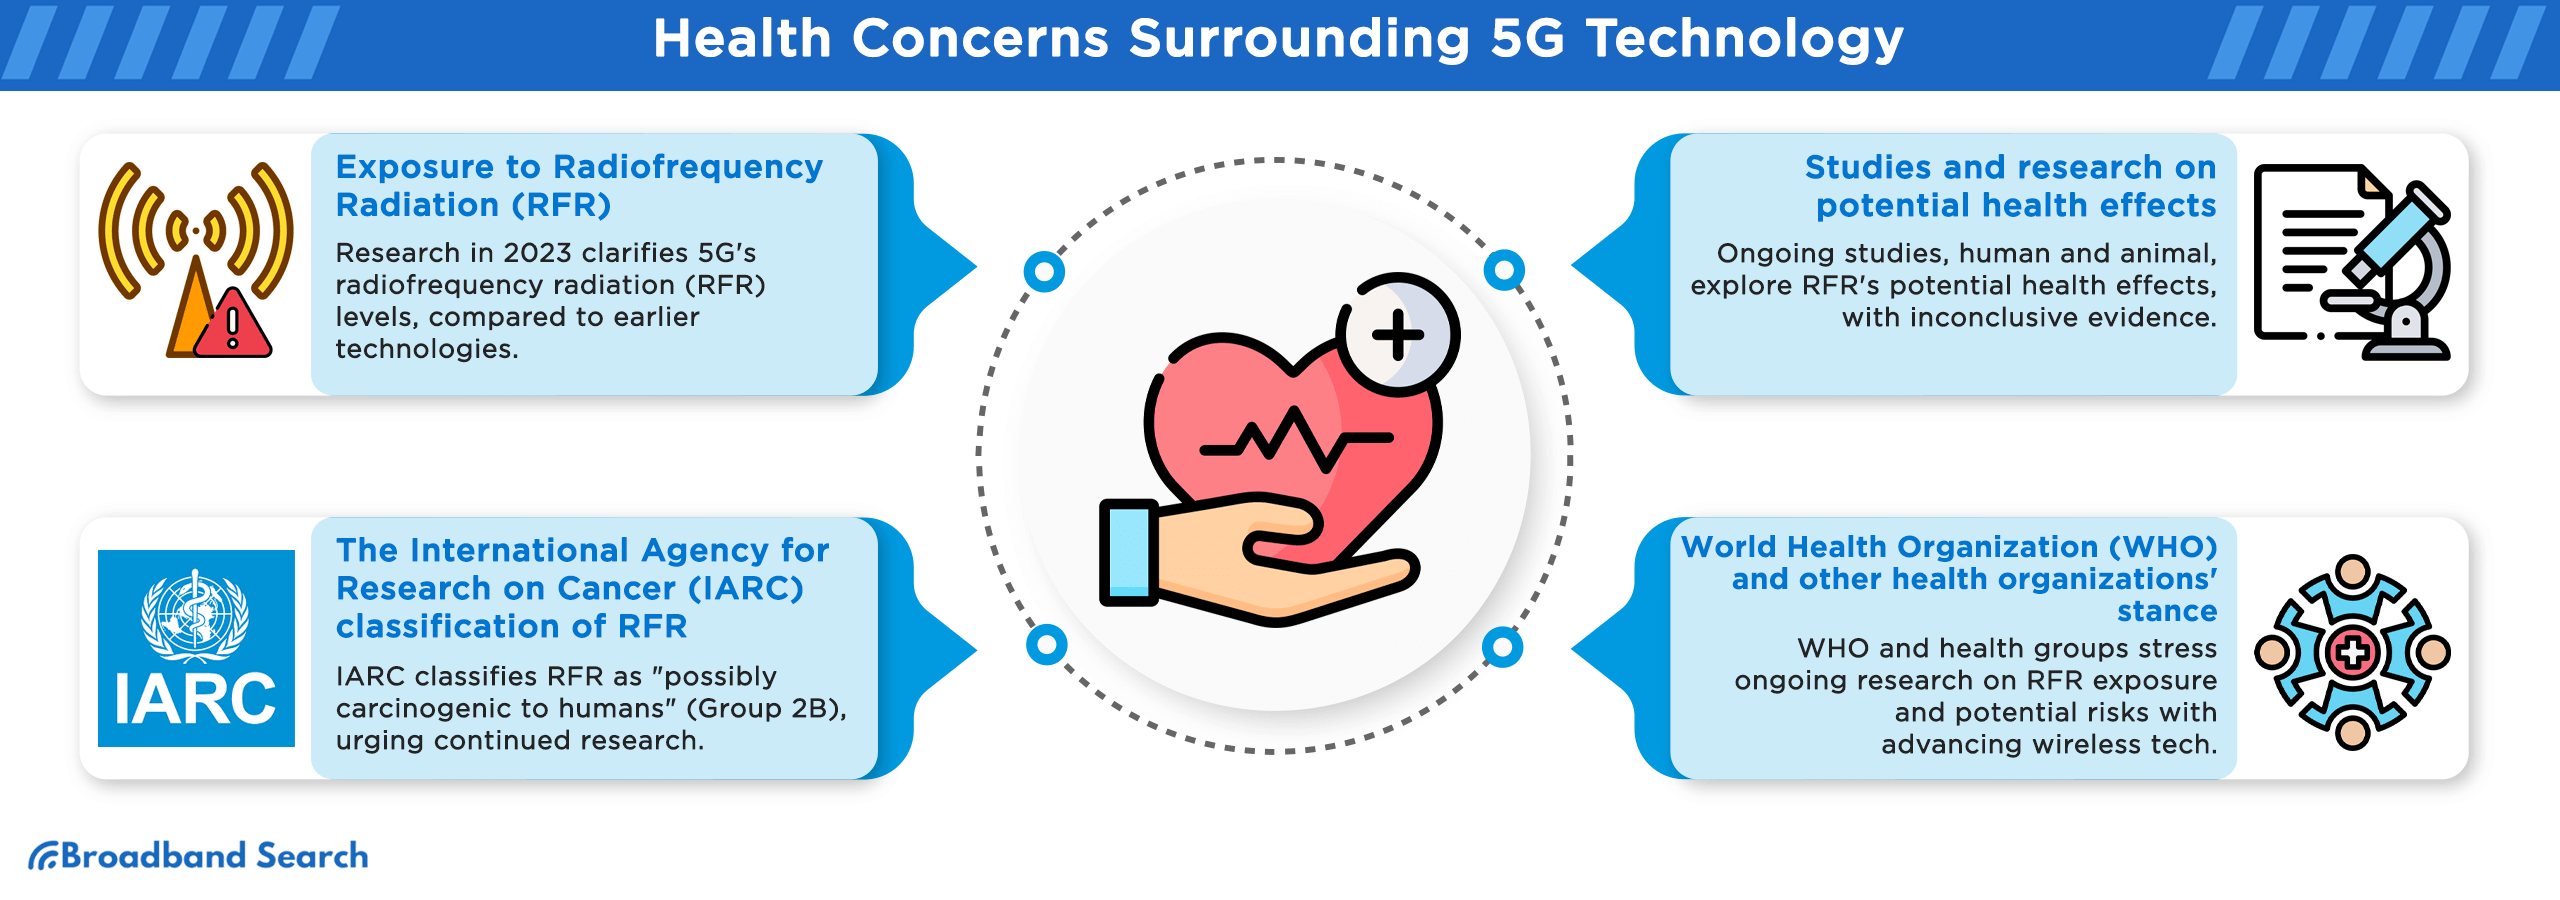 Health concerns surrounding 5g technology